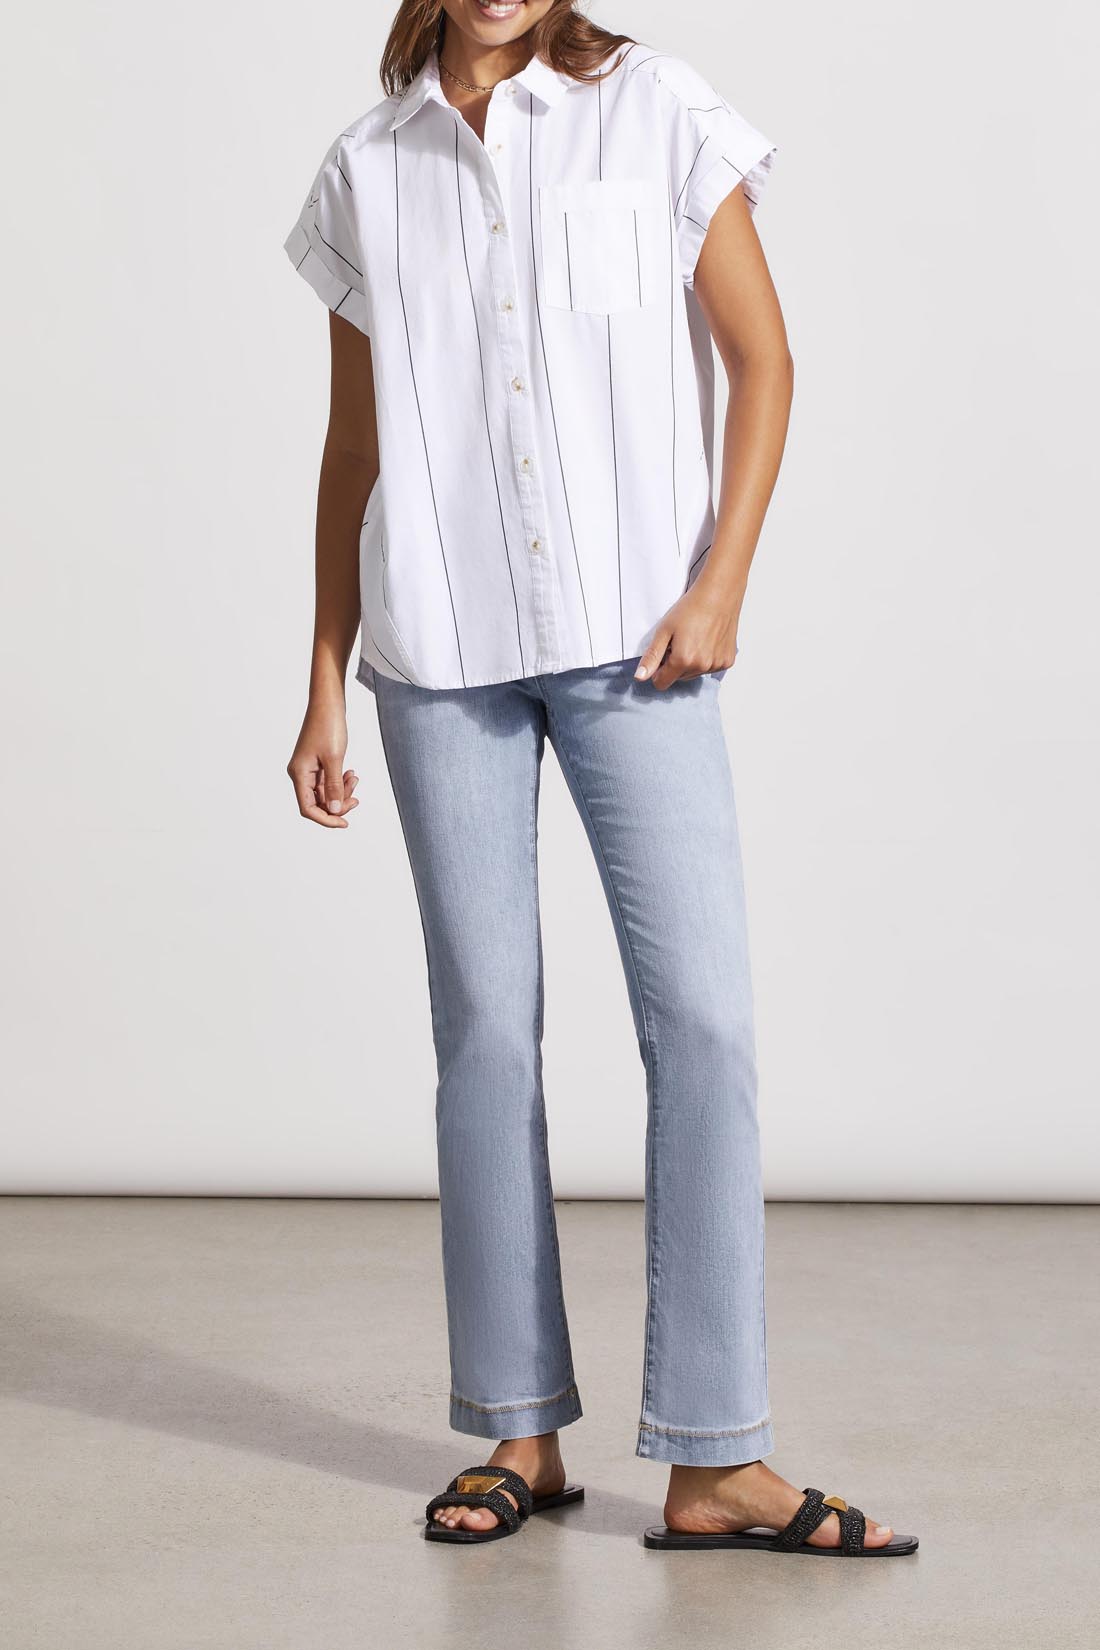 Woman wearing a Tribal striped cap sleeve shirt with cut details and jeans standing against a neutral background.